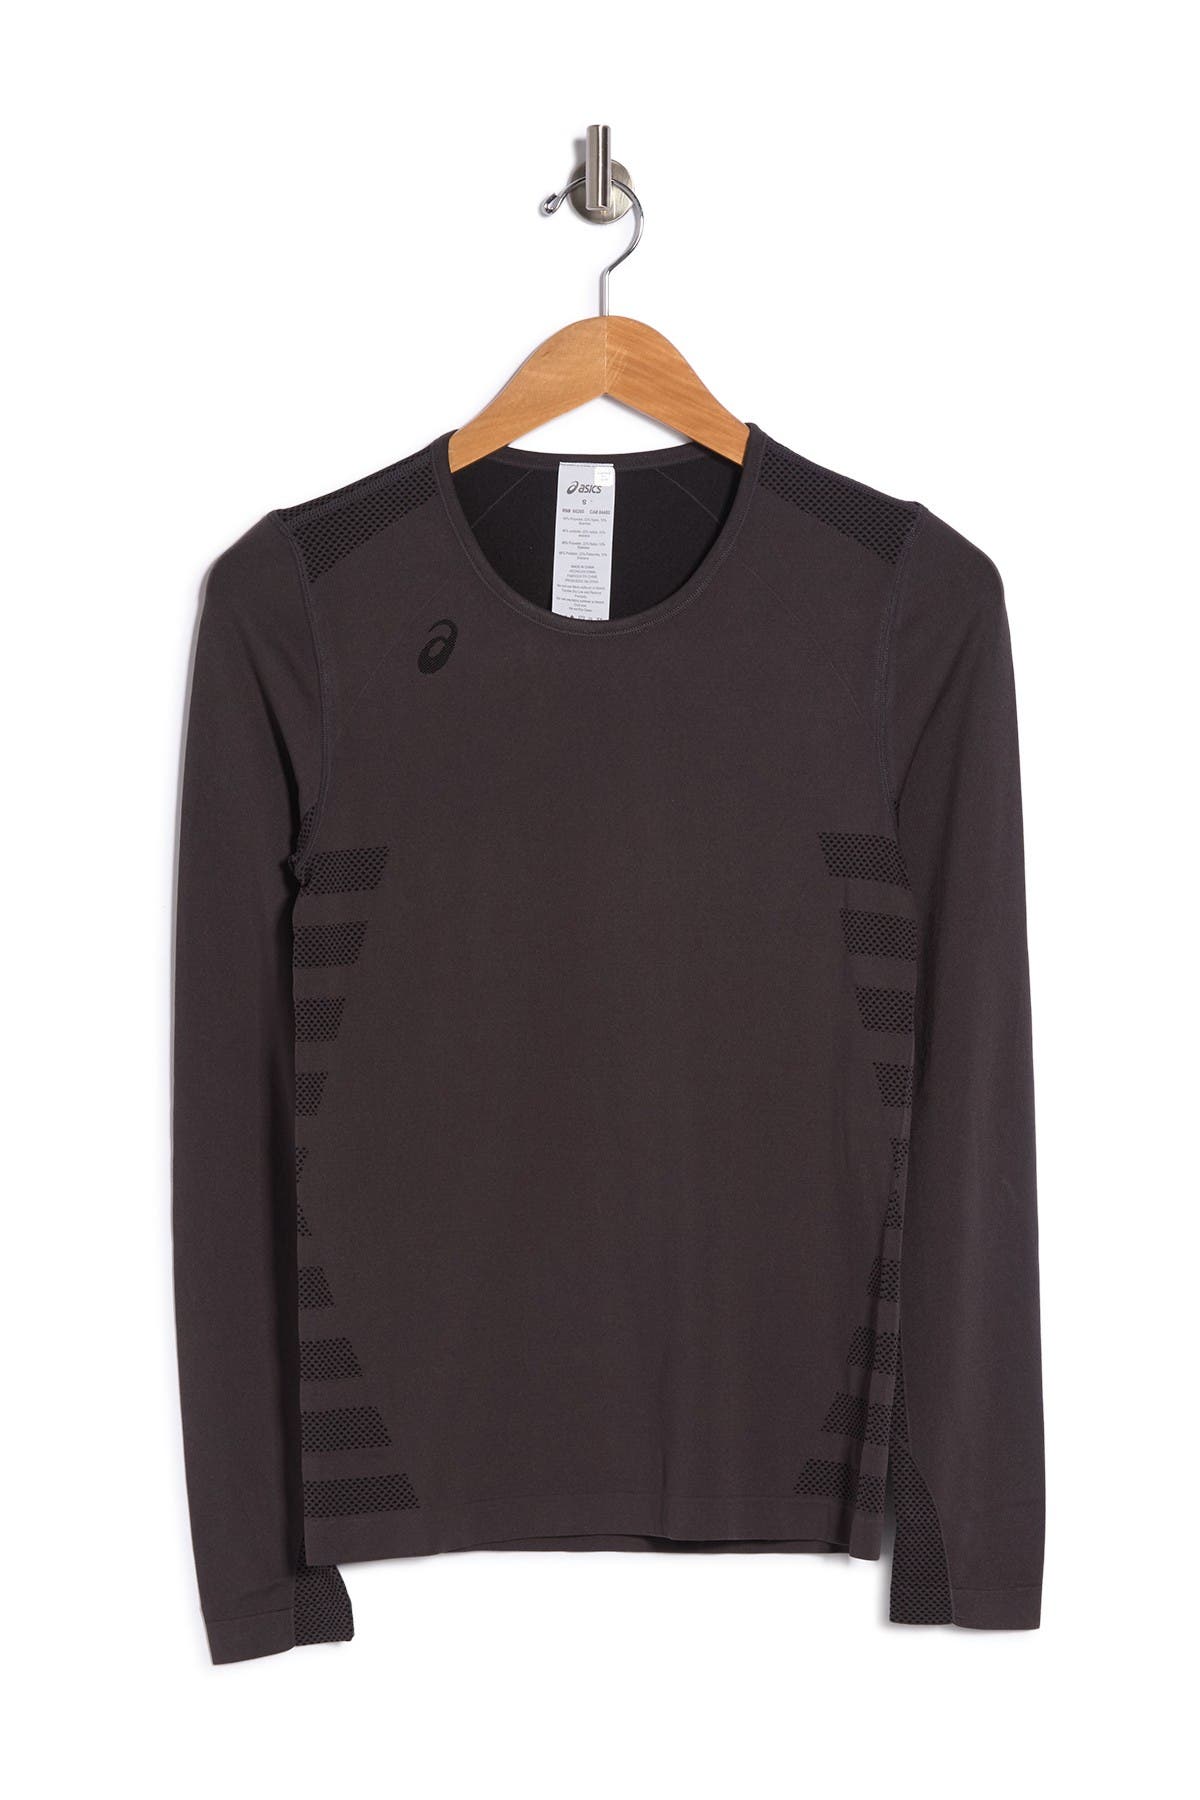 Asics Tactic Court Long Sleeve Jersey In Steel Grey